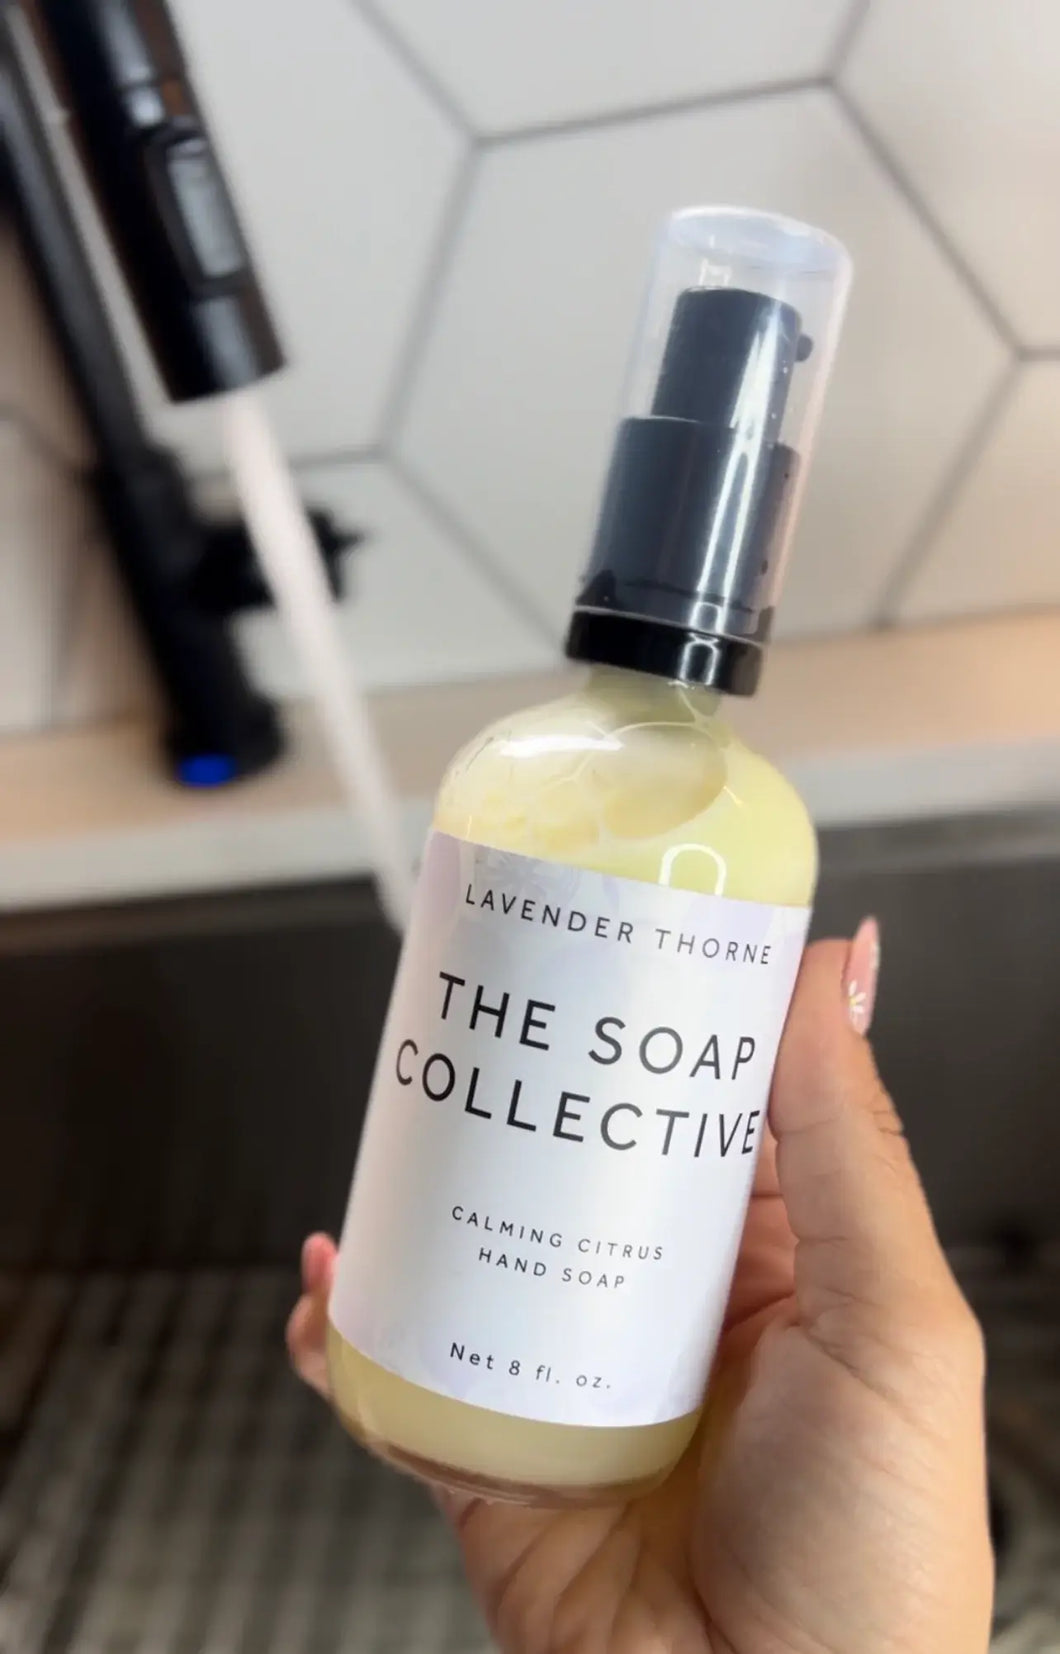 The Soap Collective